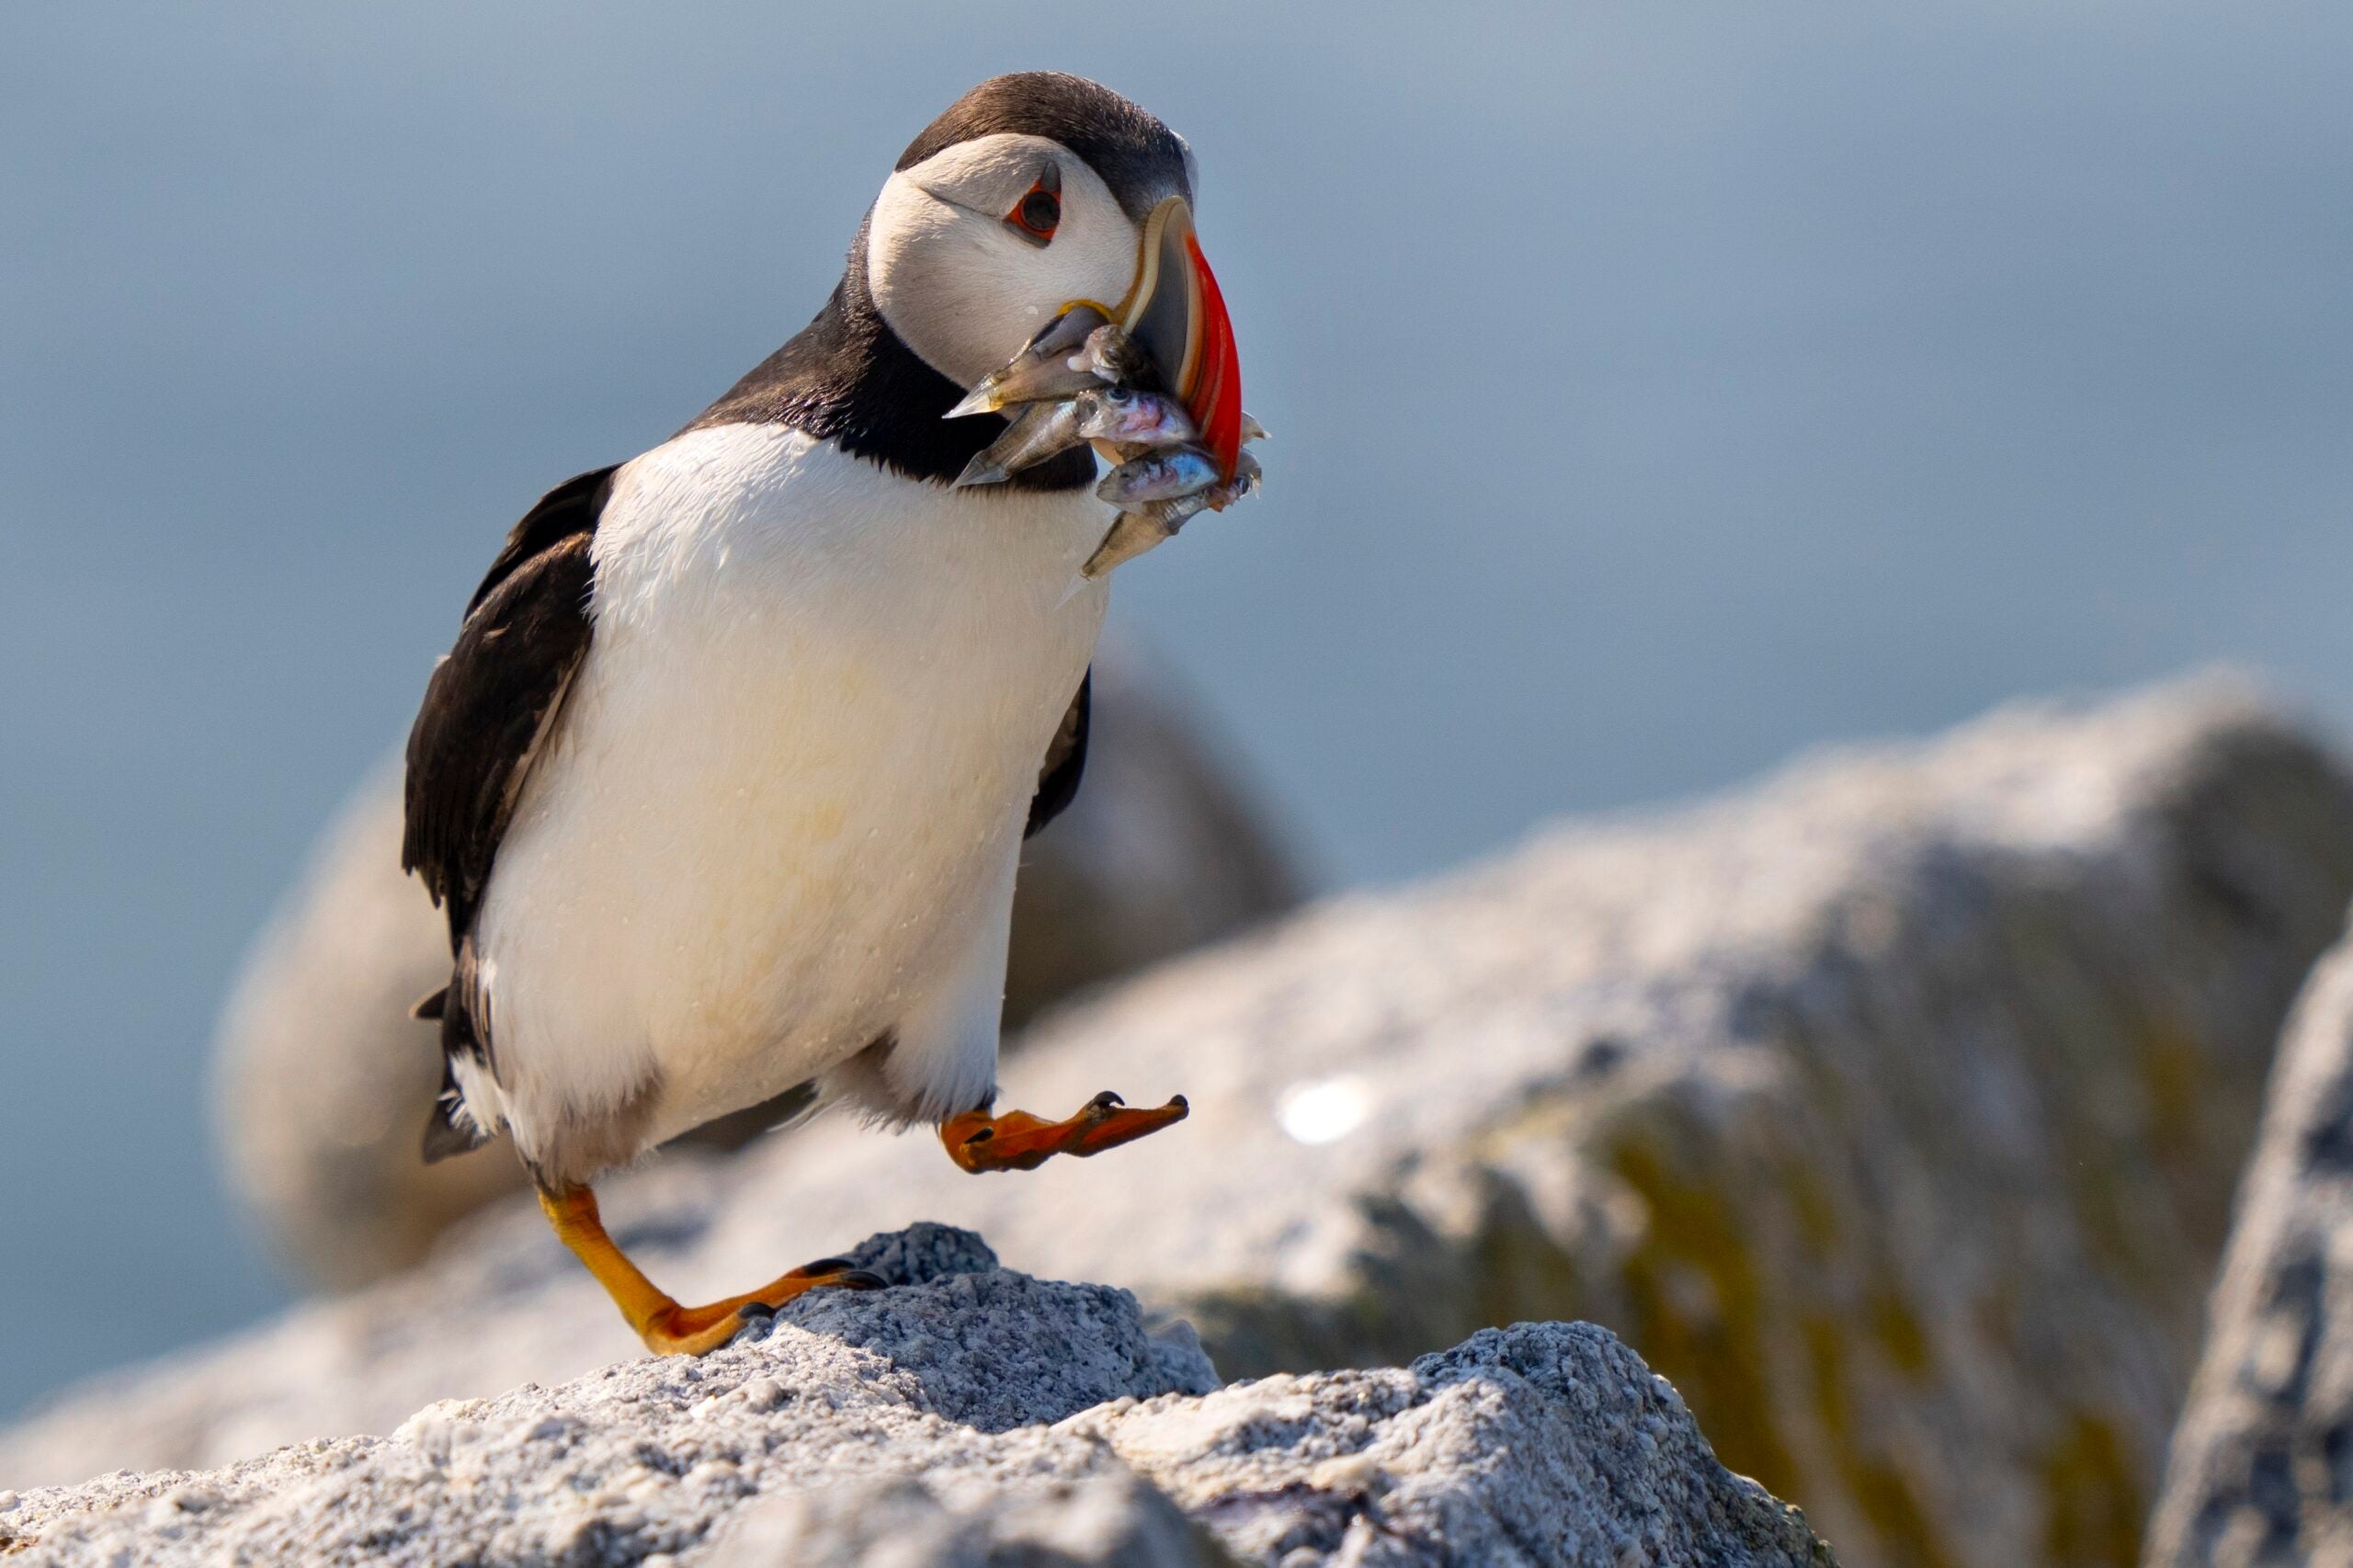 An Atlantic puffin brings a beak full of baitfish to feed its chick in a burrow under rocks on Eastern Egg Rock.